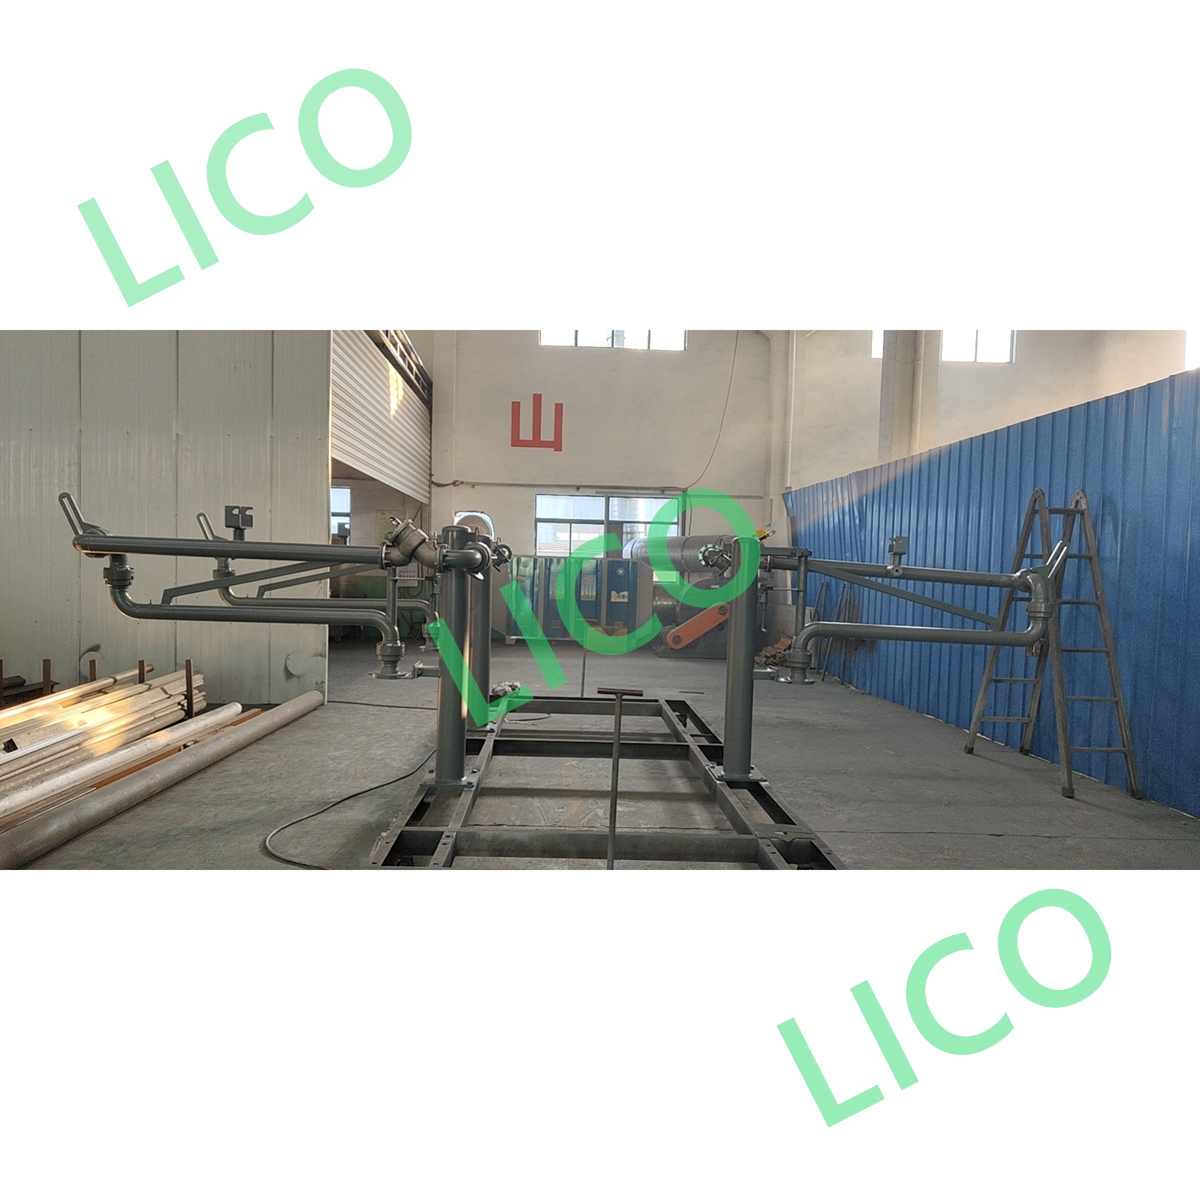 Heavy Oil Industrial Top Loading Arm for Truck